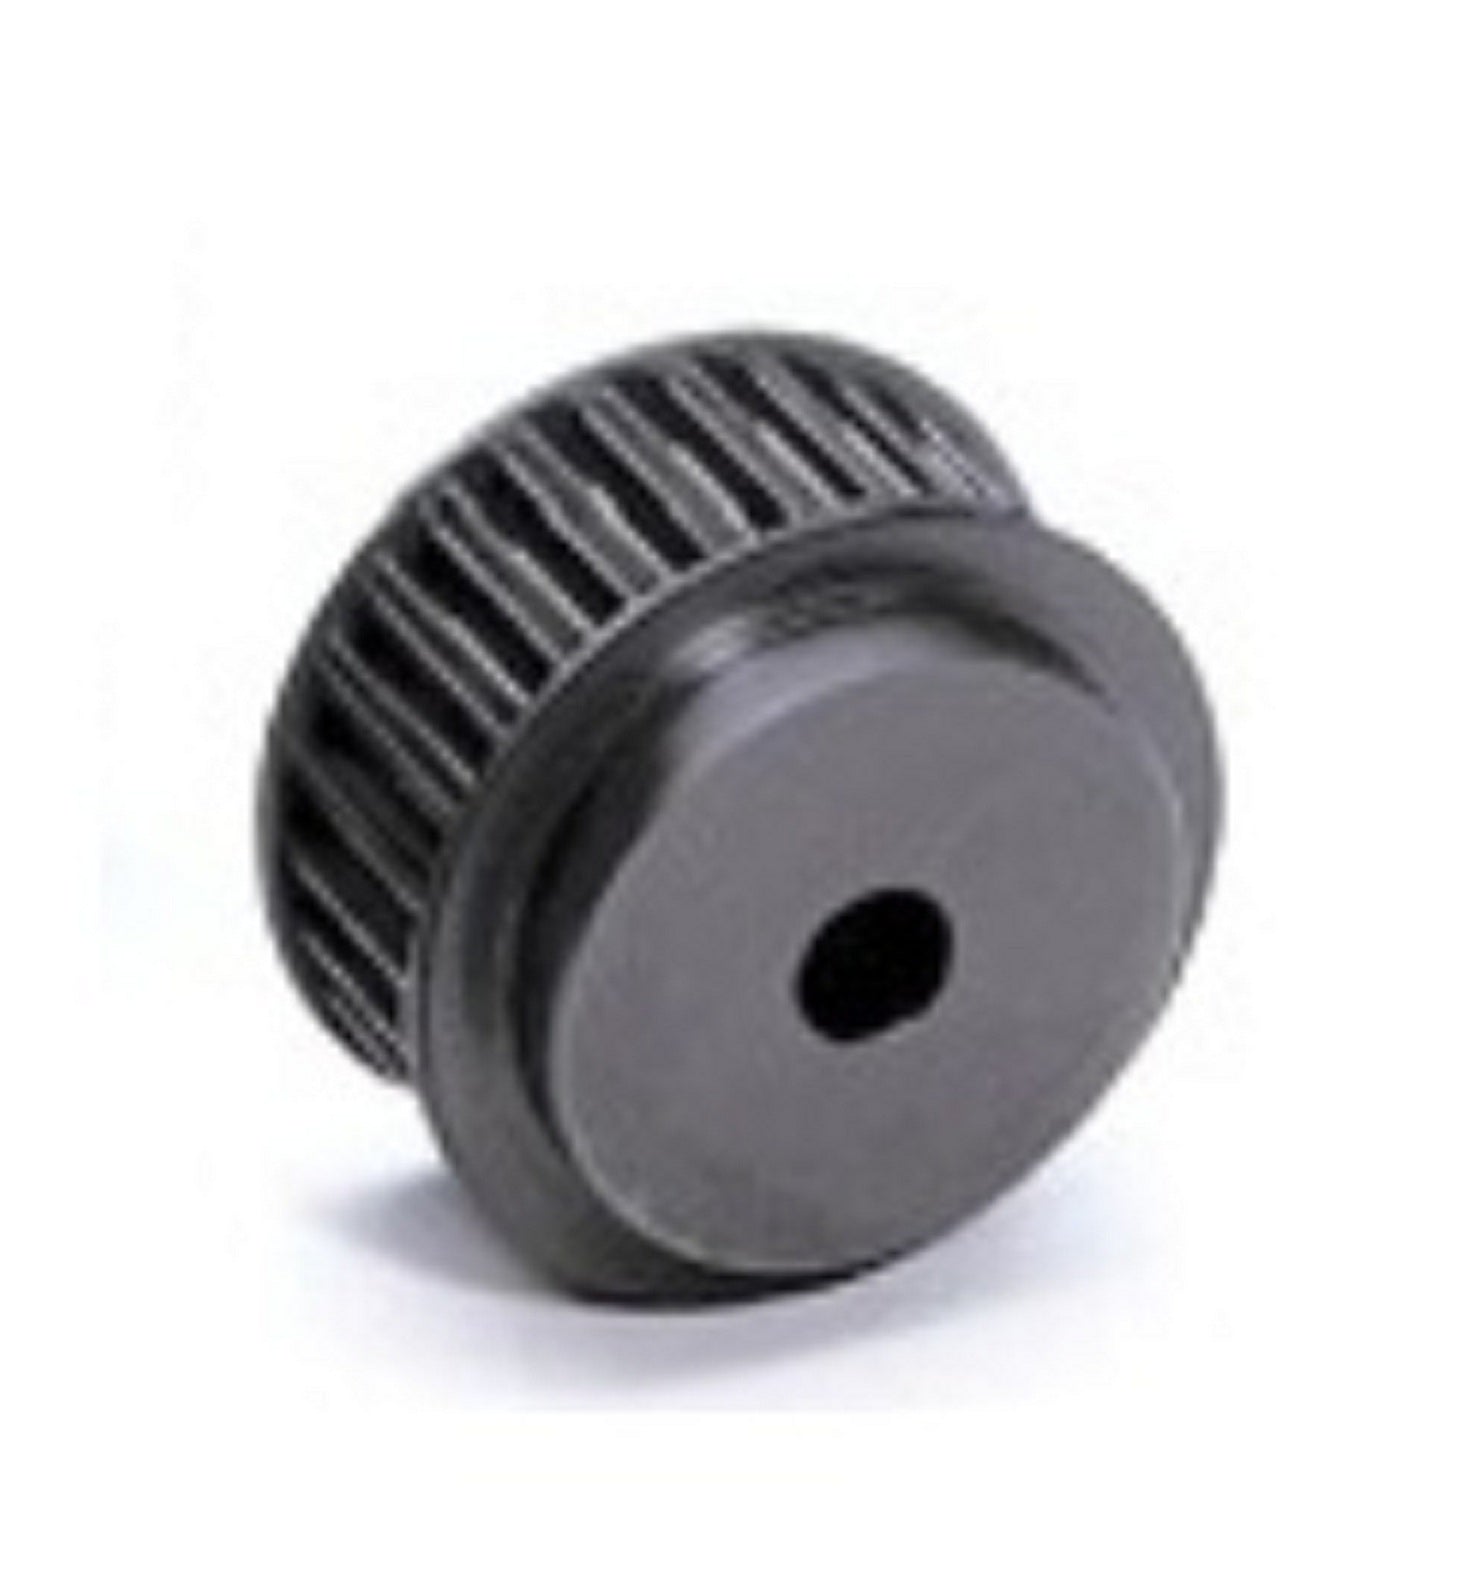 48-8M-20 Steel Pulley 48 tooth MPB